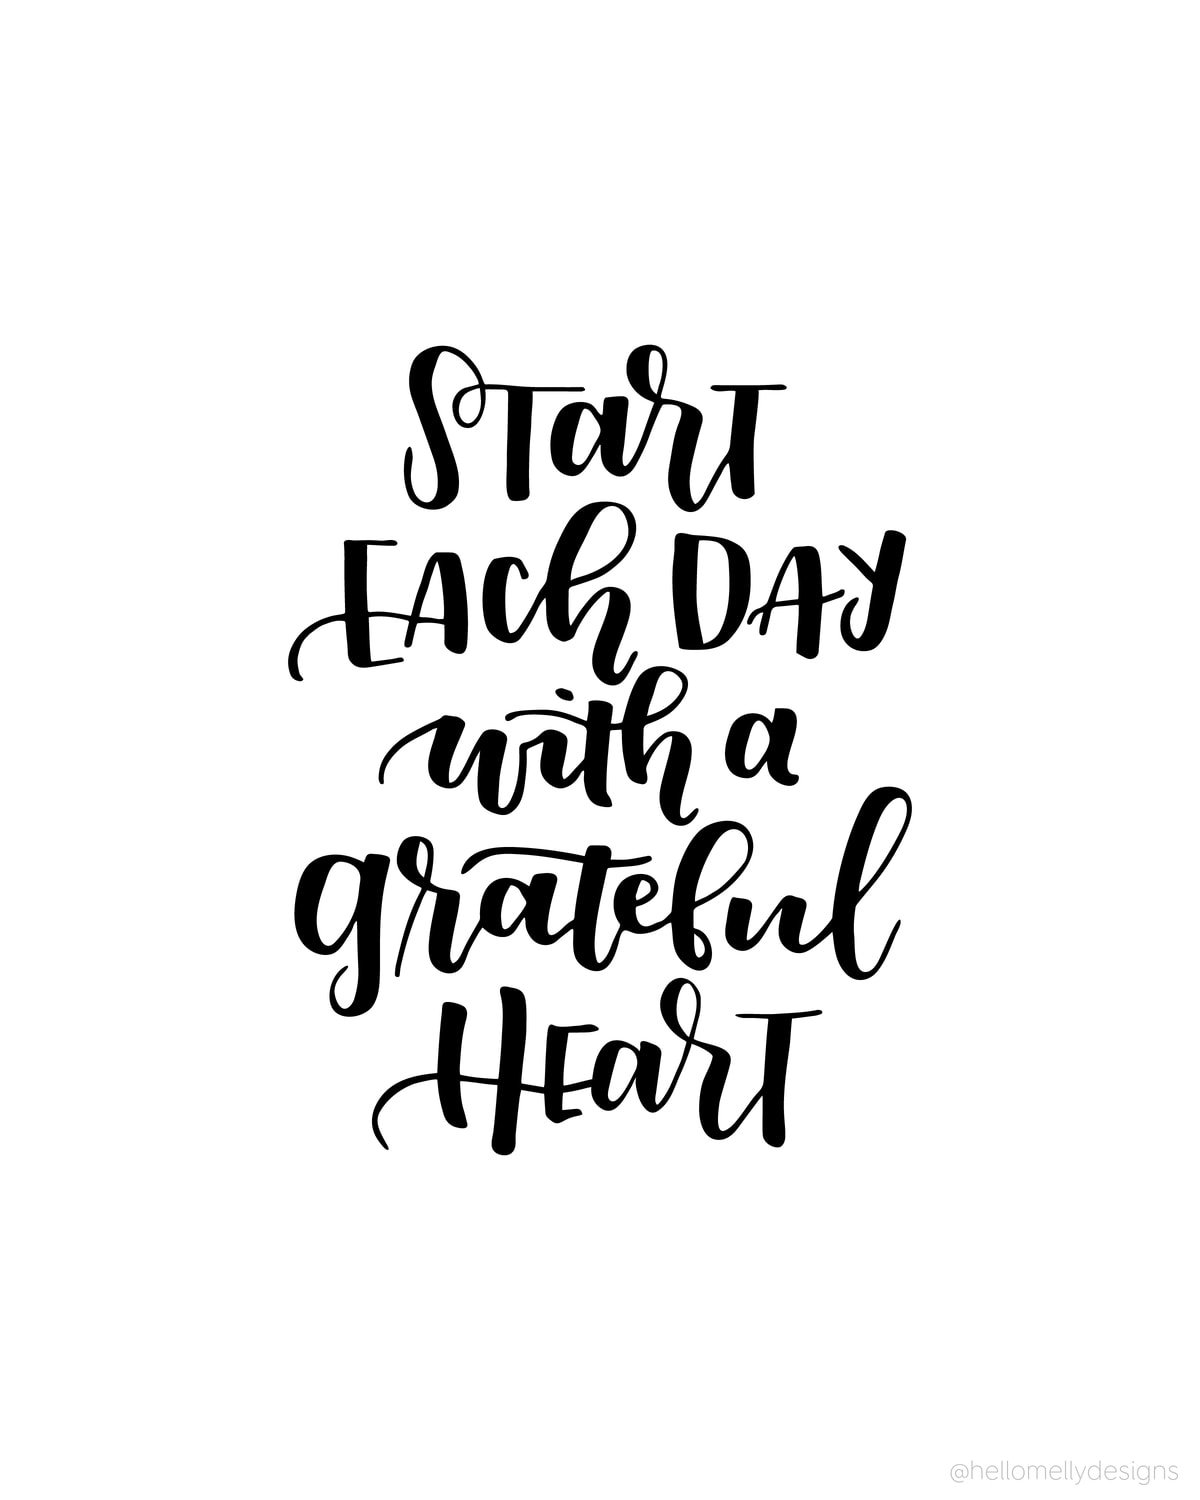 Start each Day with a Grateful Heart - such a wonderful quote. Download and print this quote for free in 3 different colors!